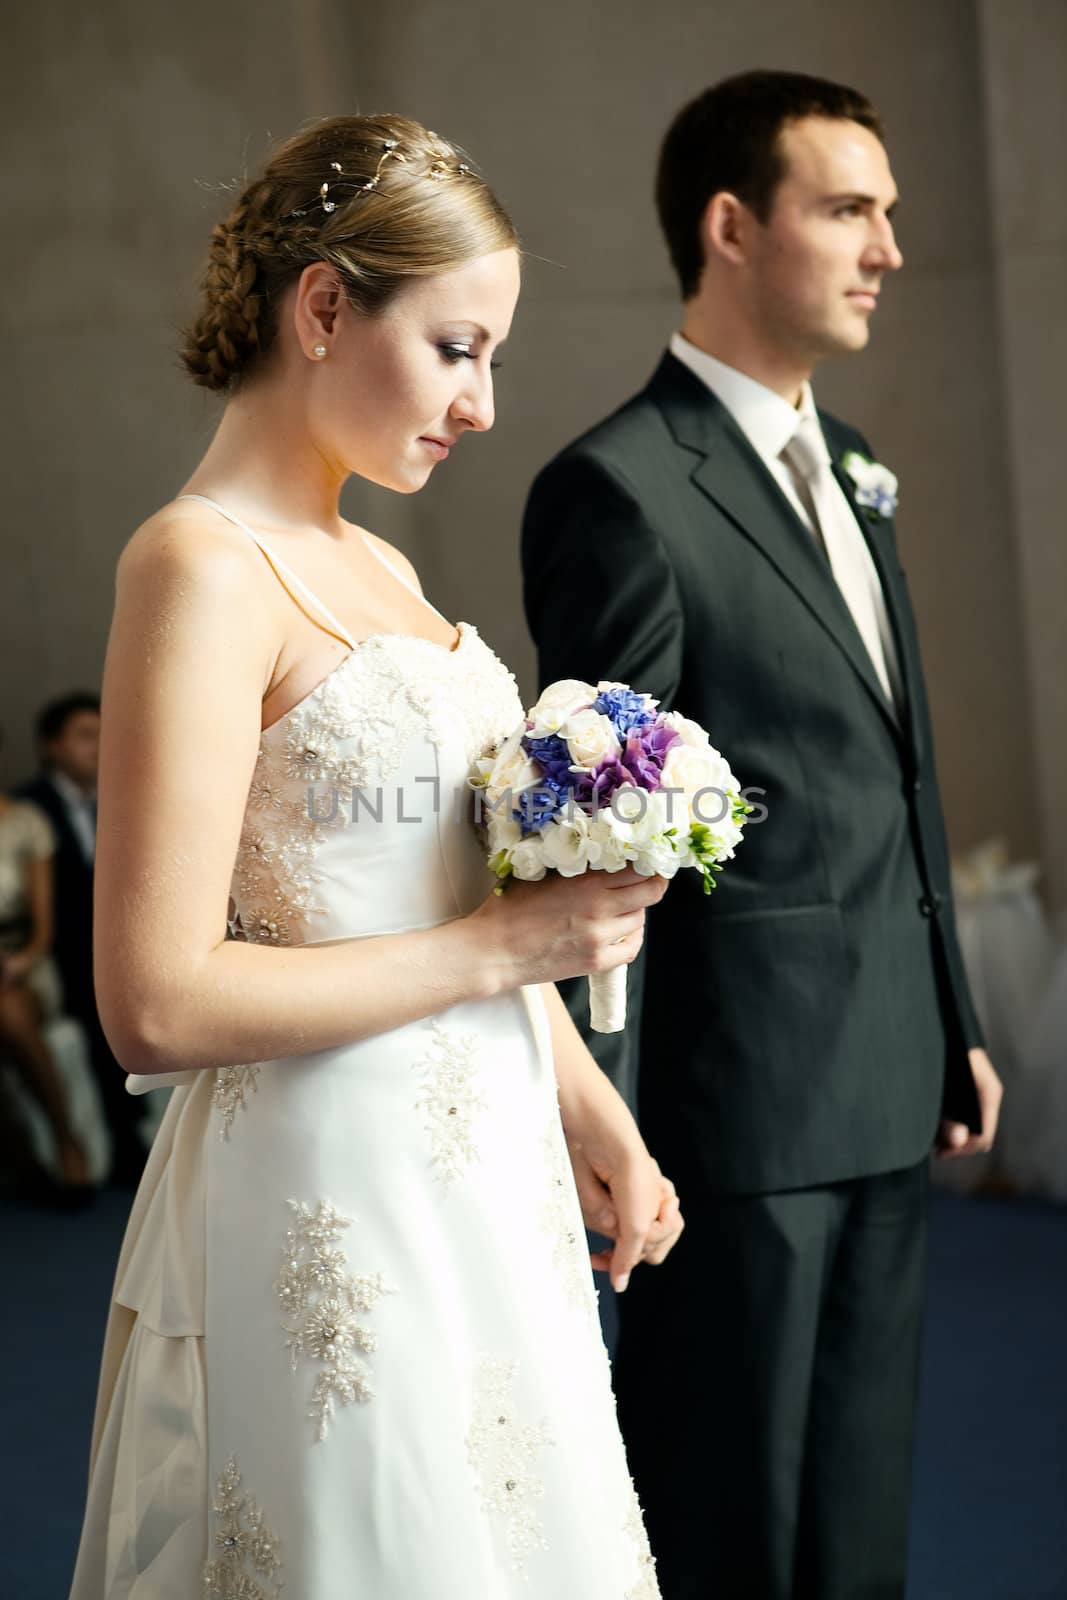 Beautiful bride in white with handsome groom on wedding day